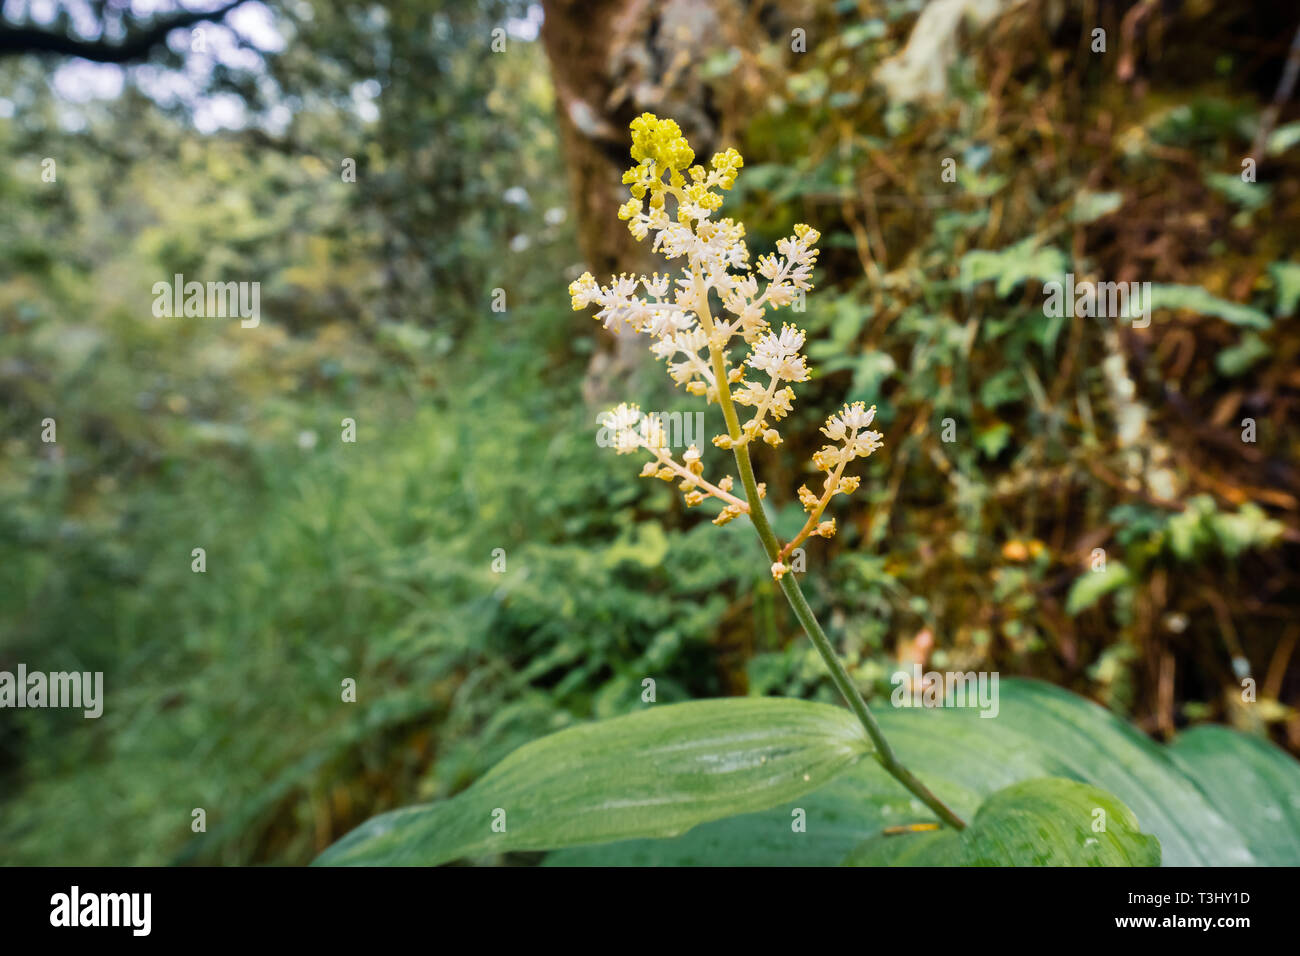 Feathery false lily of the valley (Maianthemum racemosum) blooming in a forest in San Francisco bay area, California Stock Photo